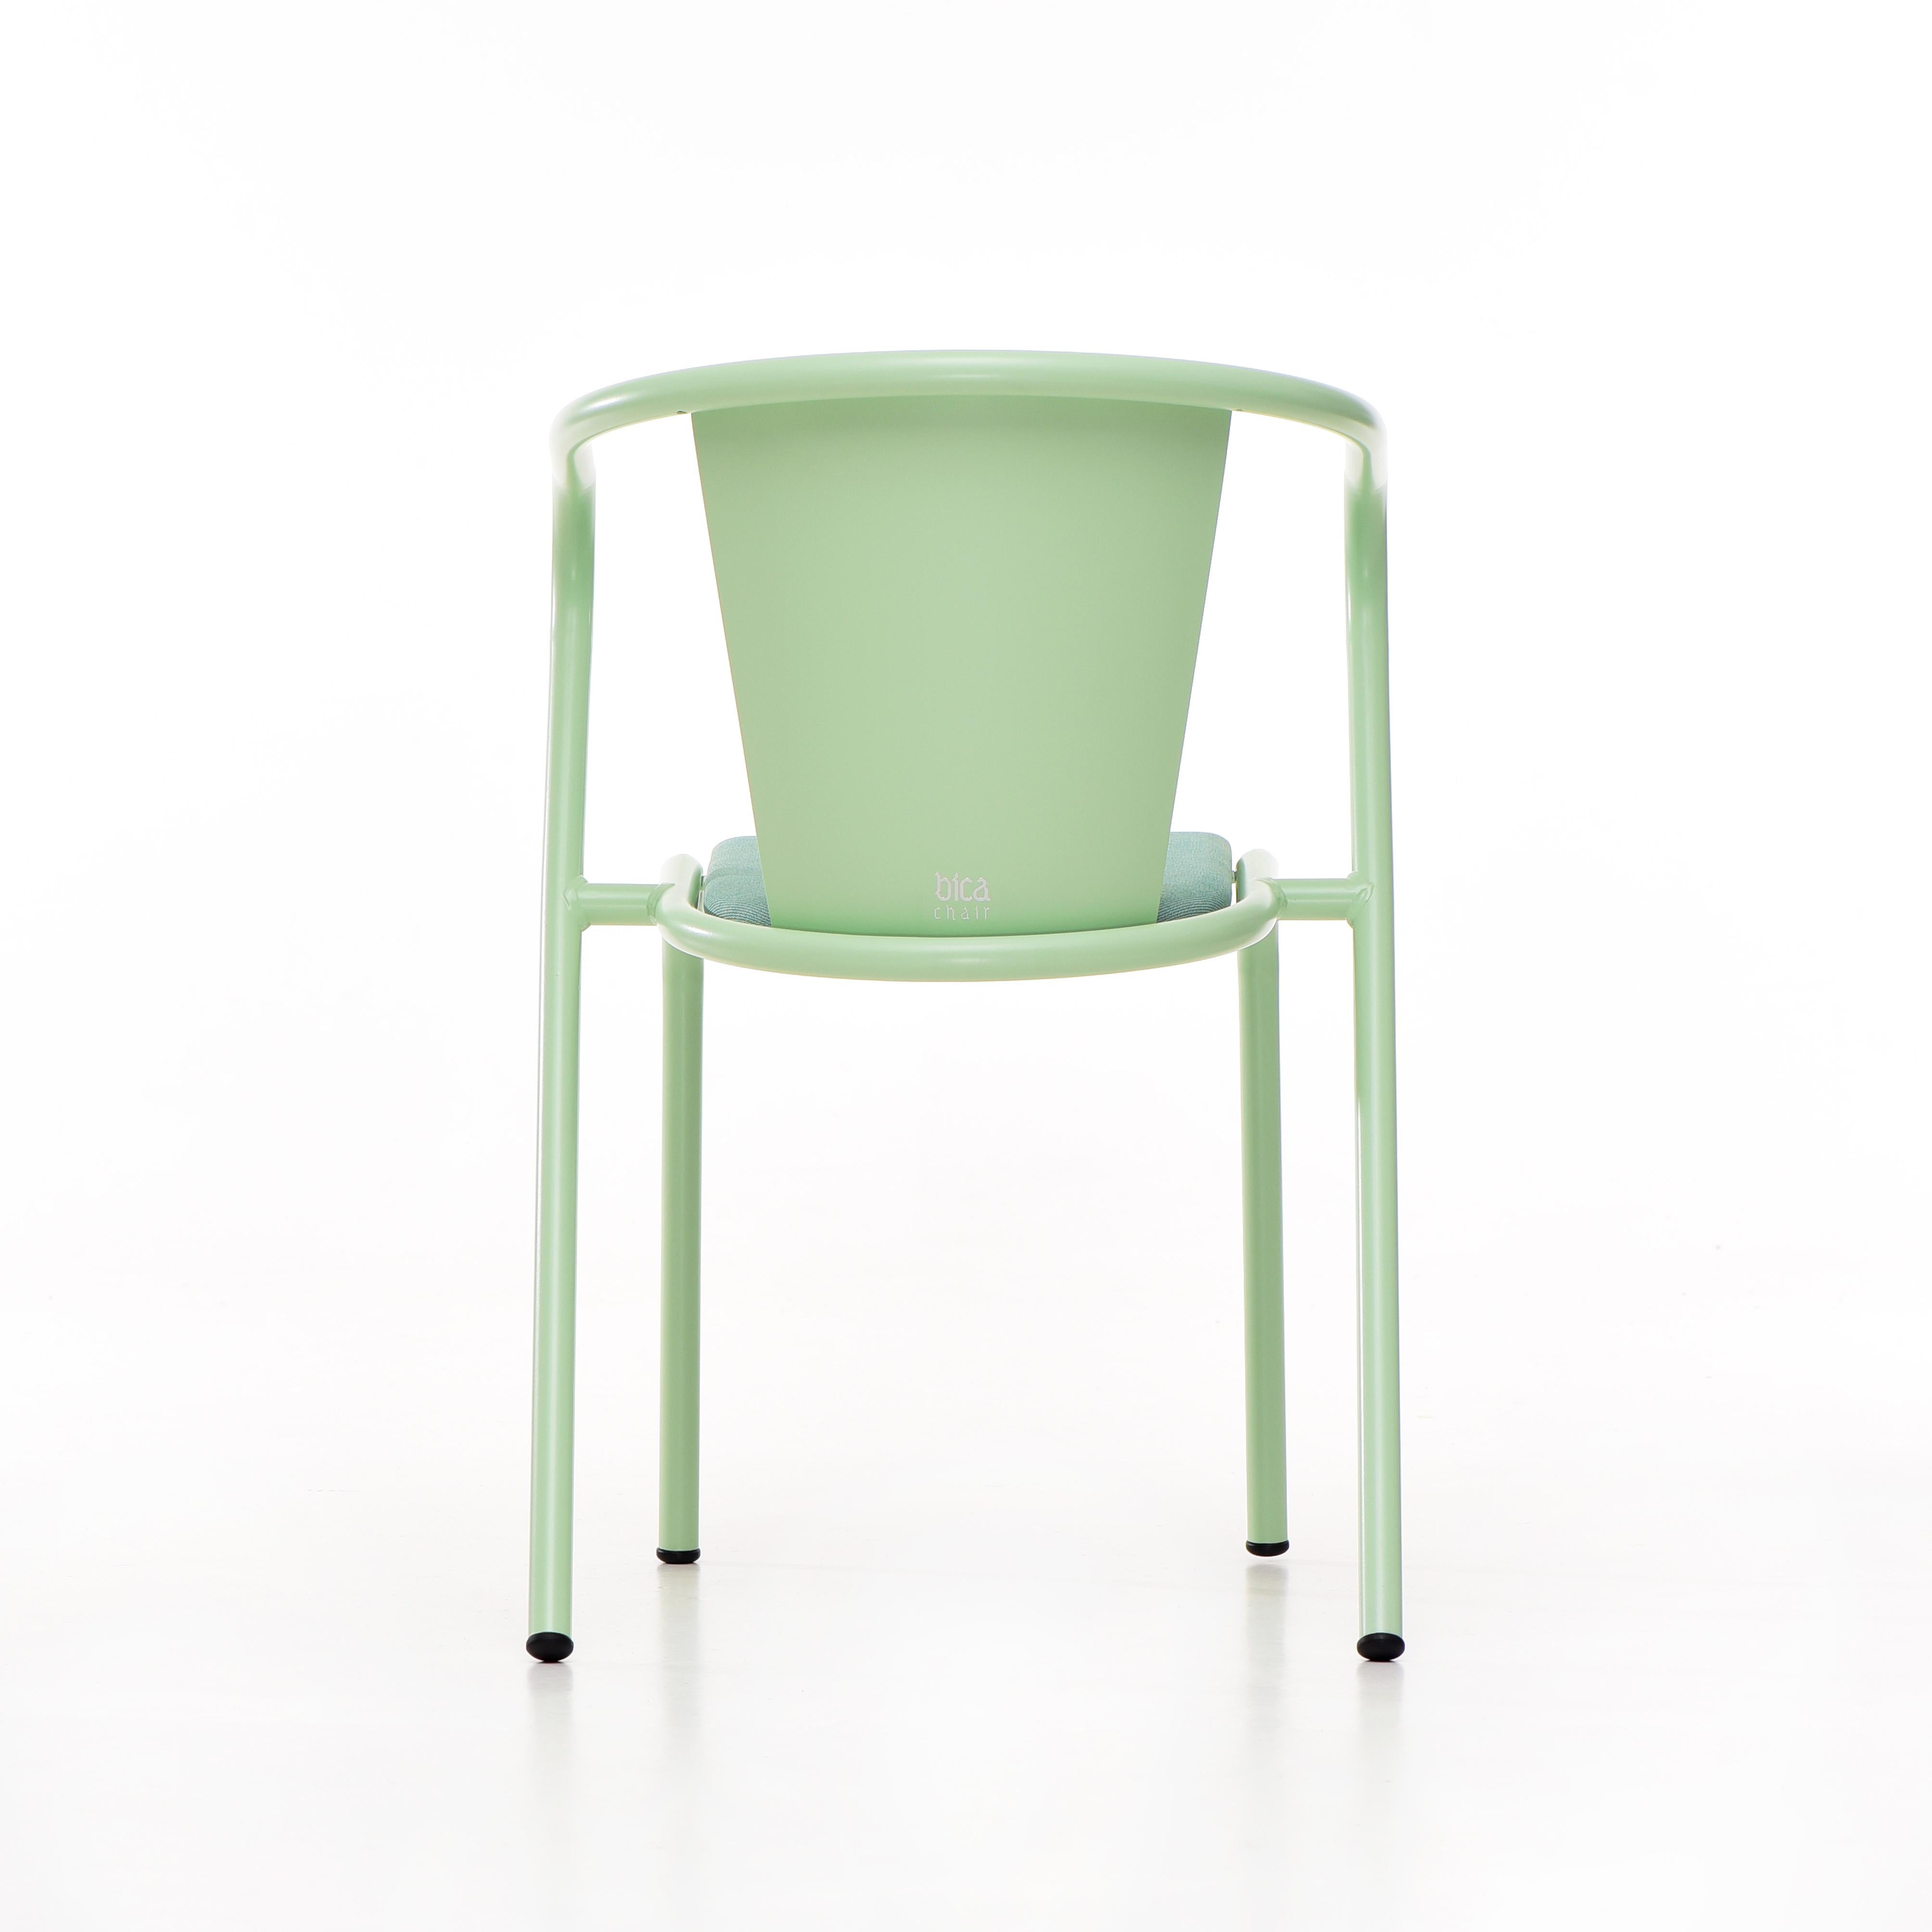 Powder-Coated BICAchair Modern Steel Armchair Pastel Green, Upholstery in Eco-Fabric For Sale